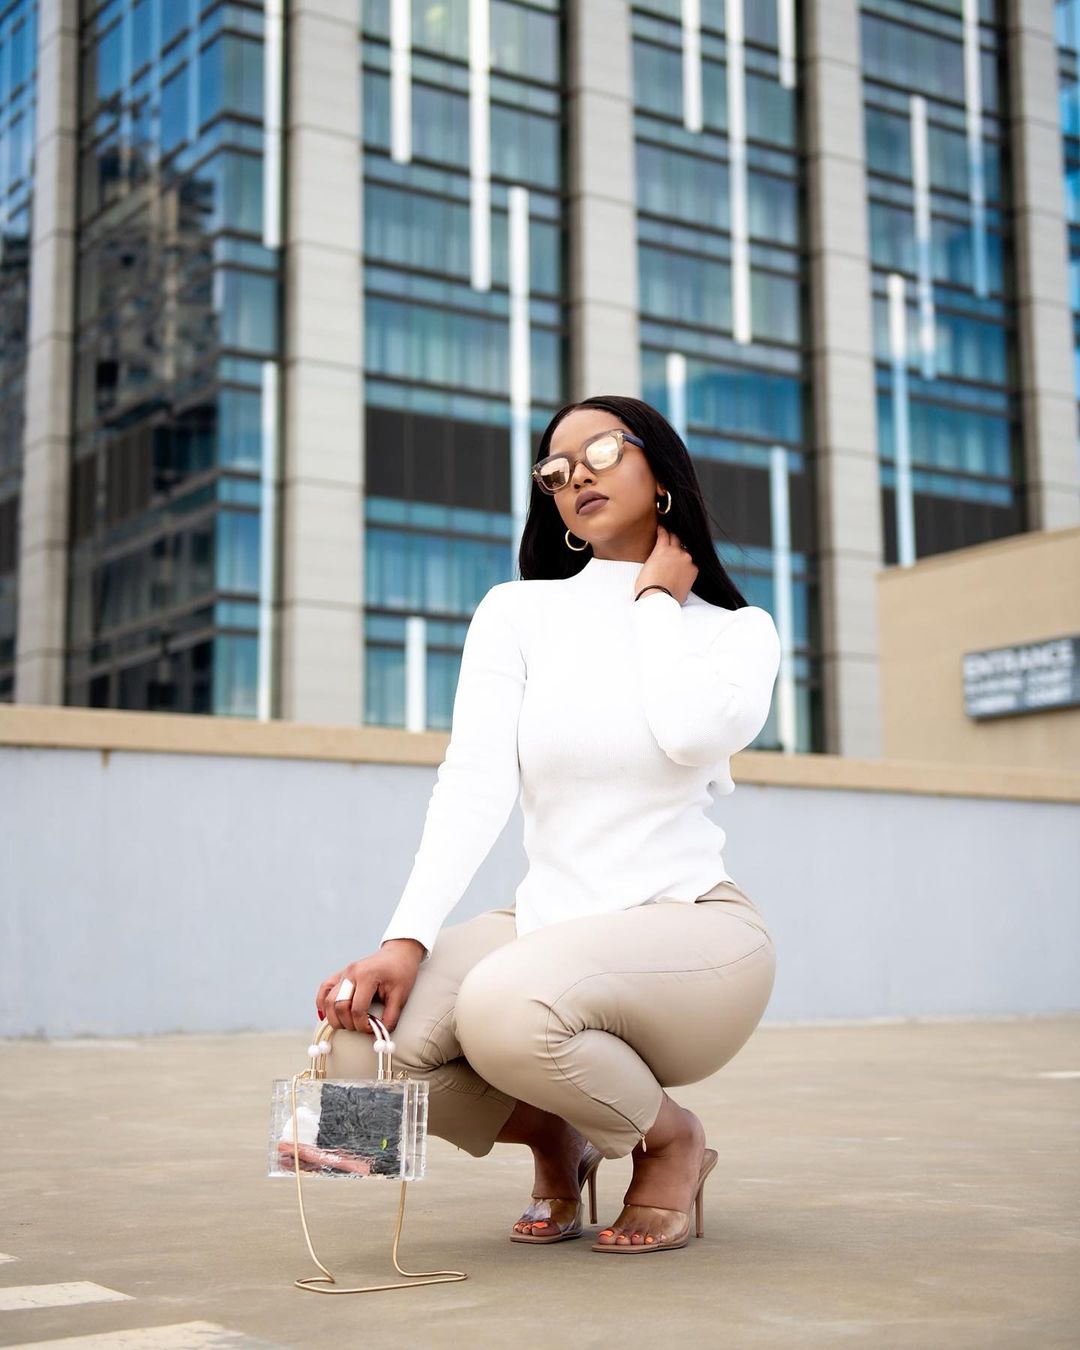 Youtuber Mihlali Ndamase Reveals She Has Learned To Communicate Better Over The Years